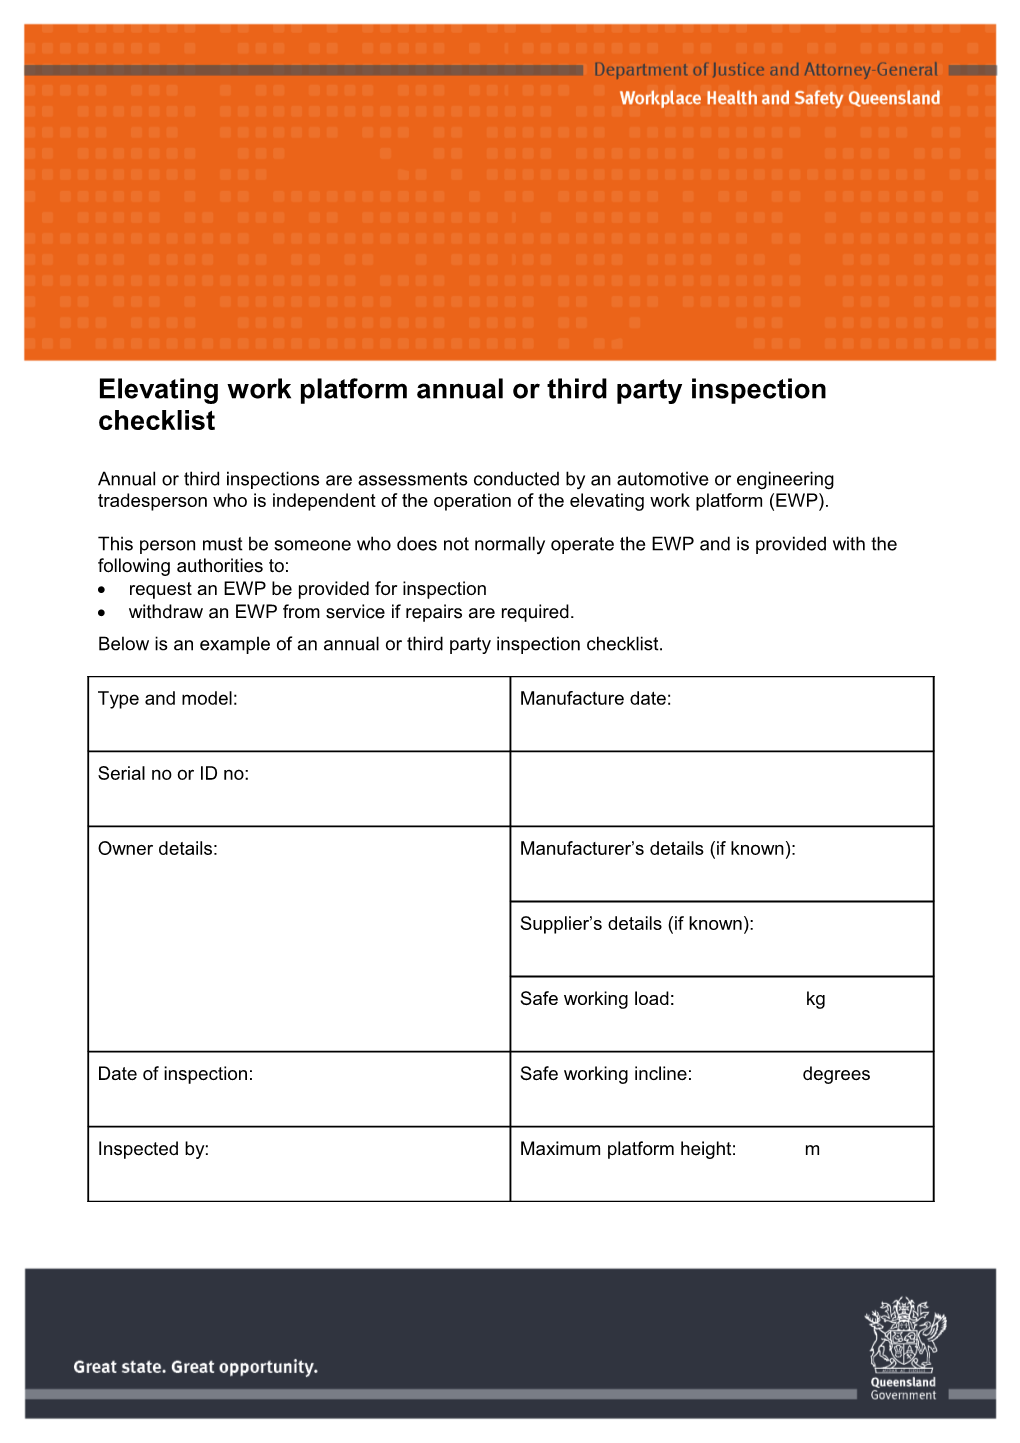 Elevating Work Platform Annual Or Third Party Inspection Checklist